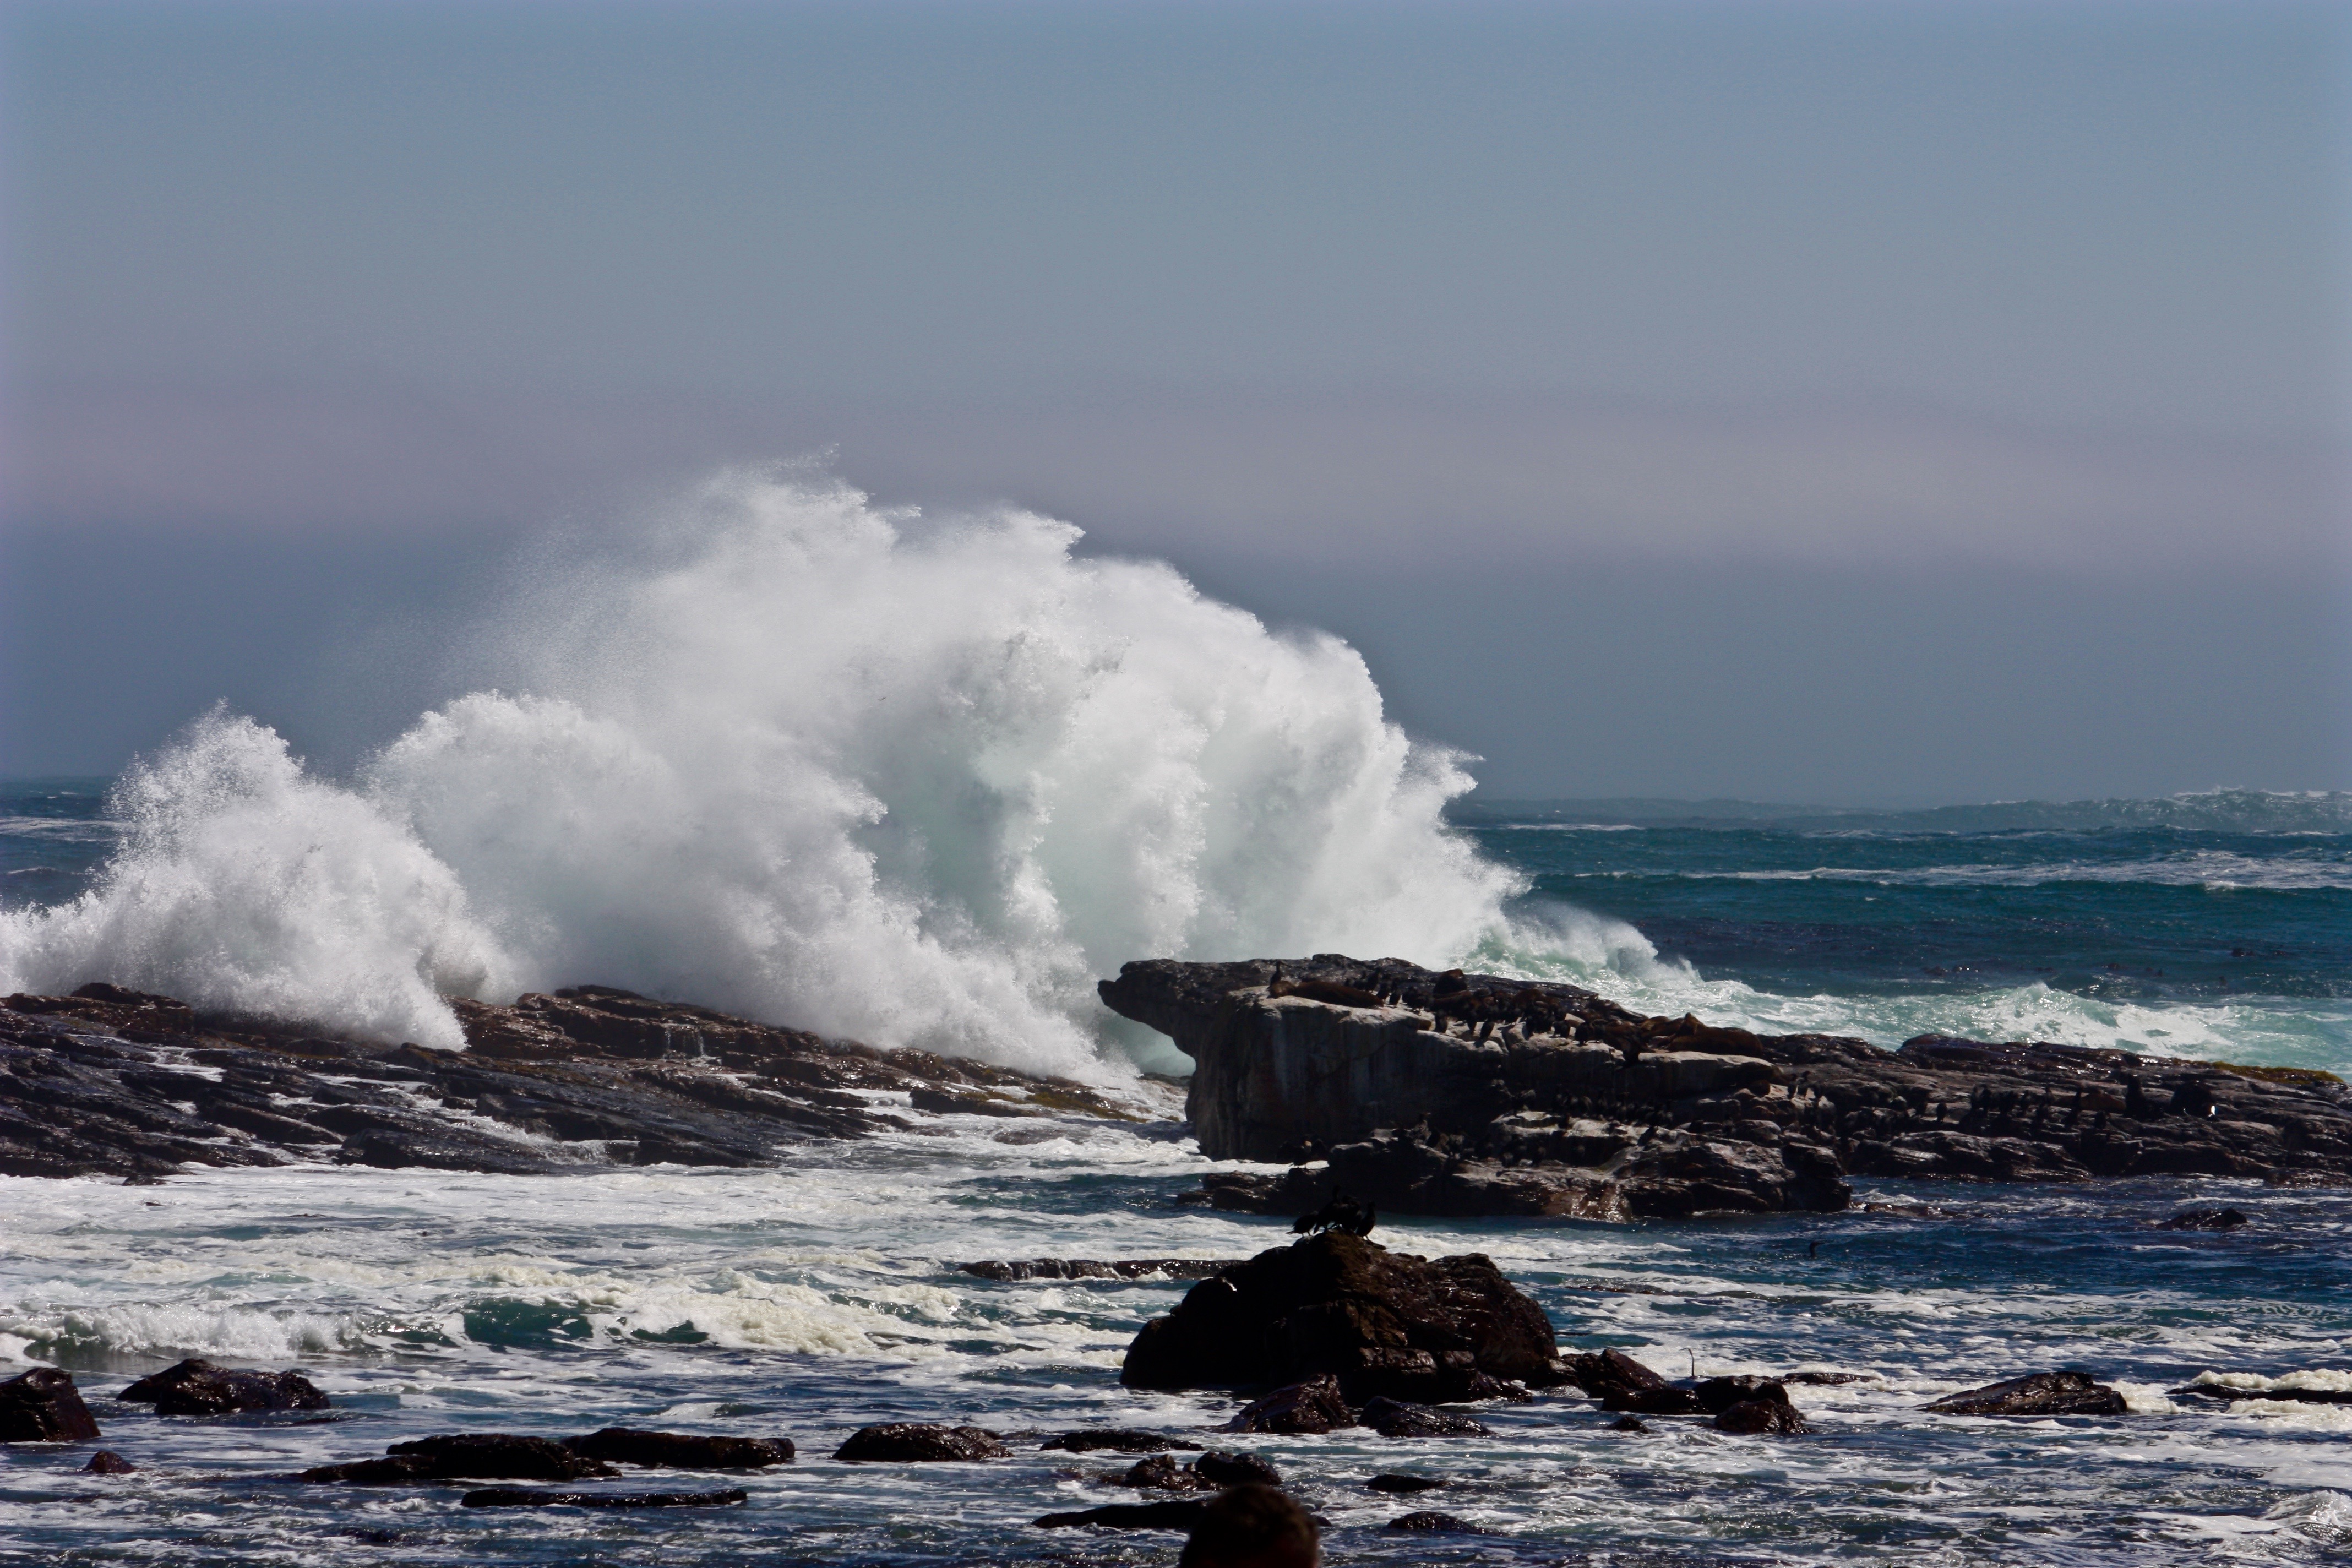 Ship-breaking waves at Cape Point, South Africa - Imgur